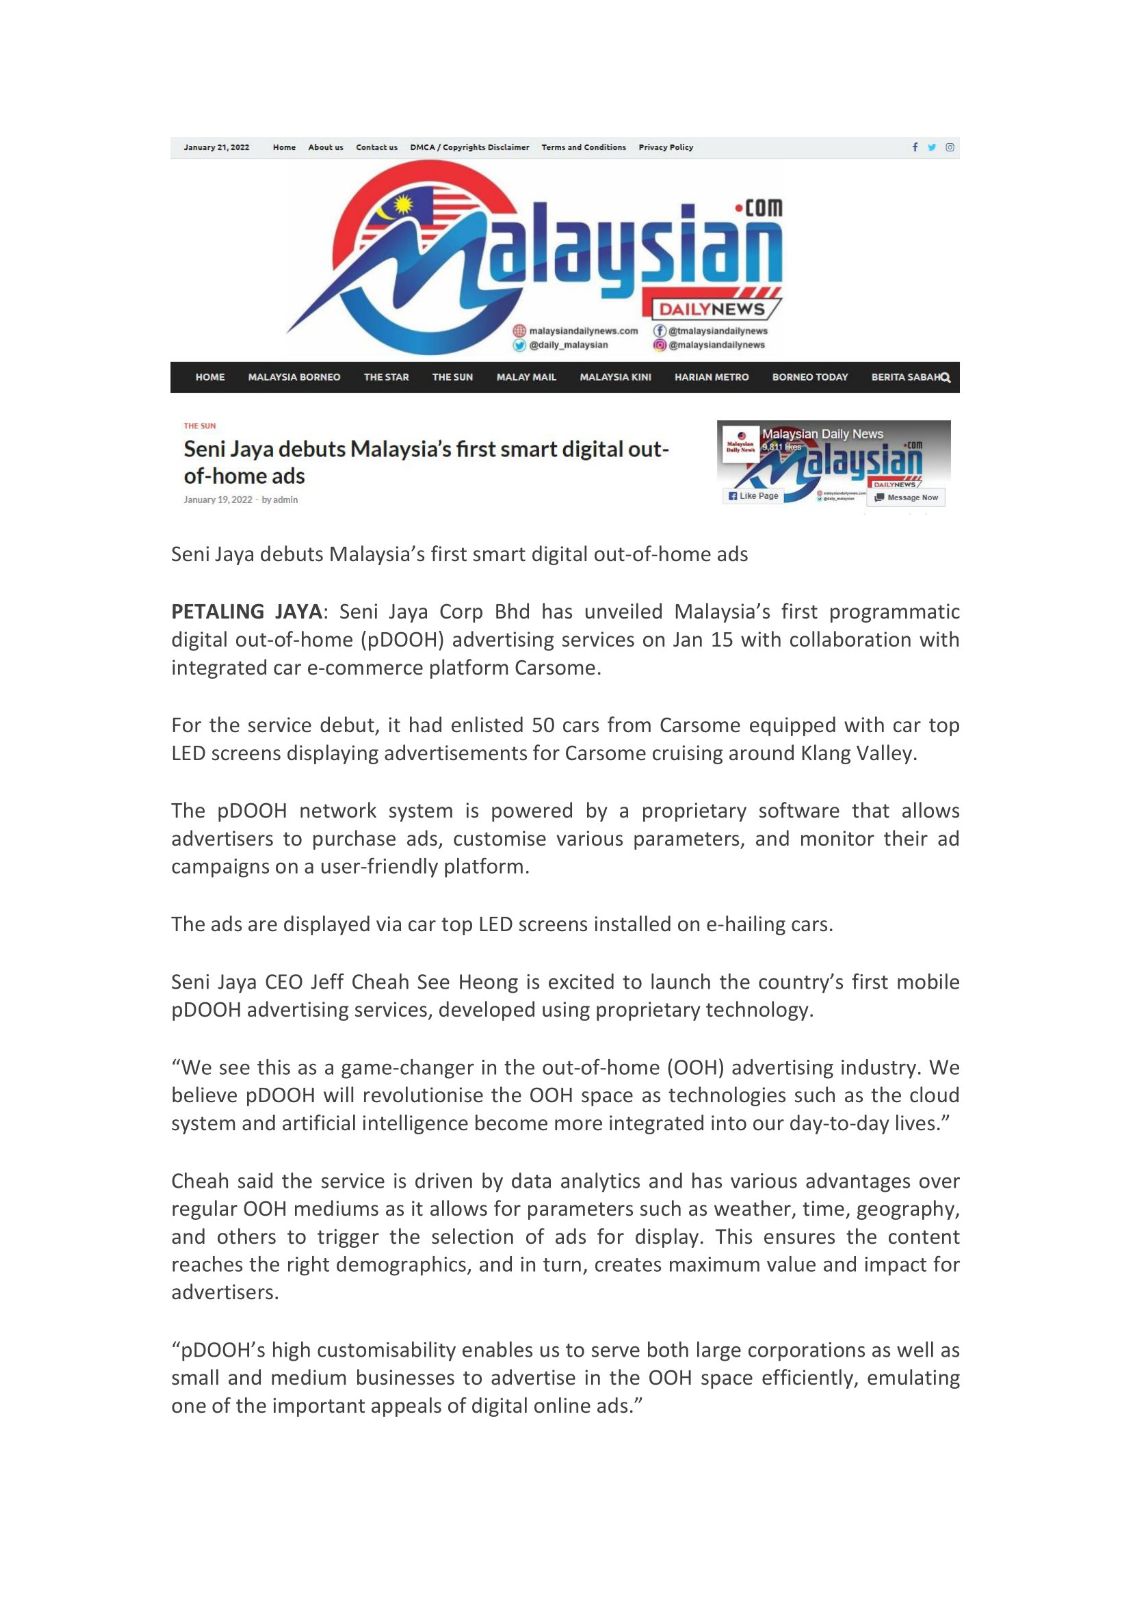 [ Launched Malaysia's 1st Mobile PDOOH ] 2022-01-19 | Malaysian Daily News